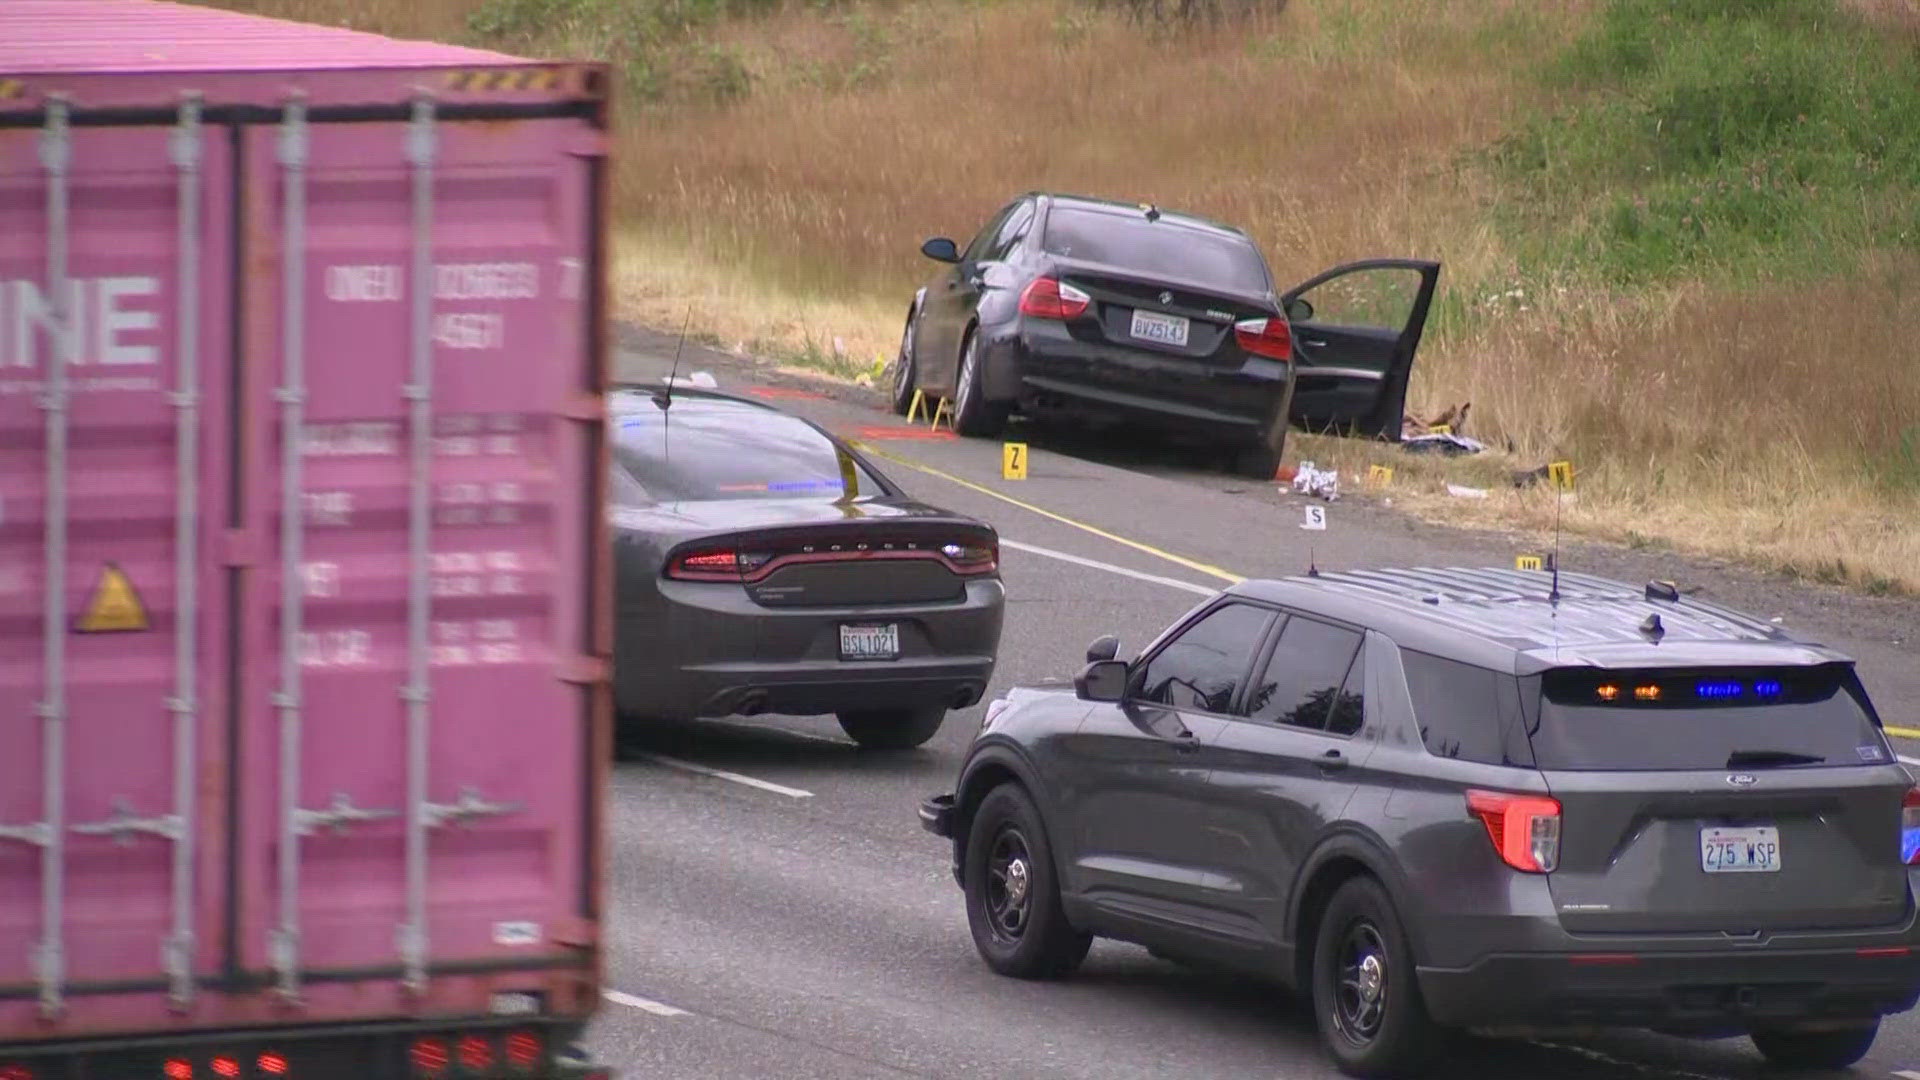 The driver of a BMW is dead and three others are injured after an incident that occurred on Interstate 5 on June 26 near Federal Way.